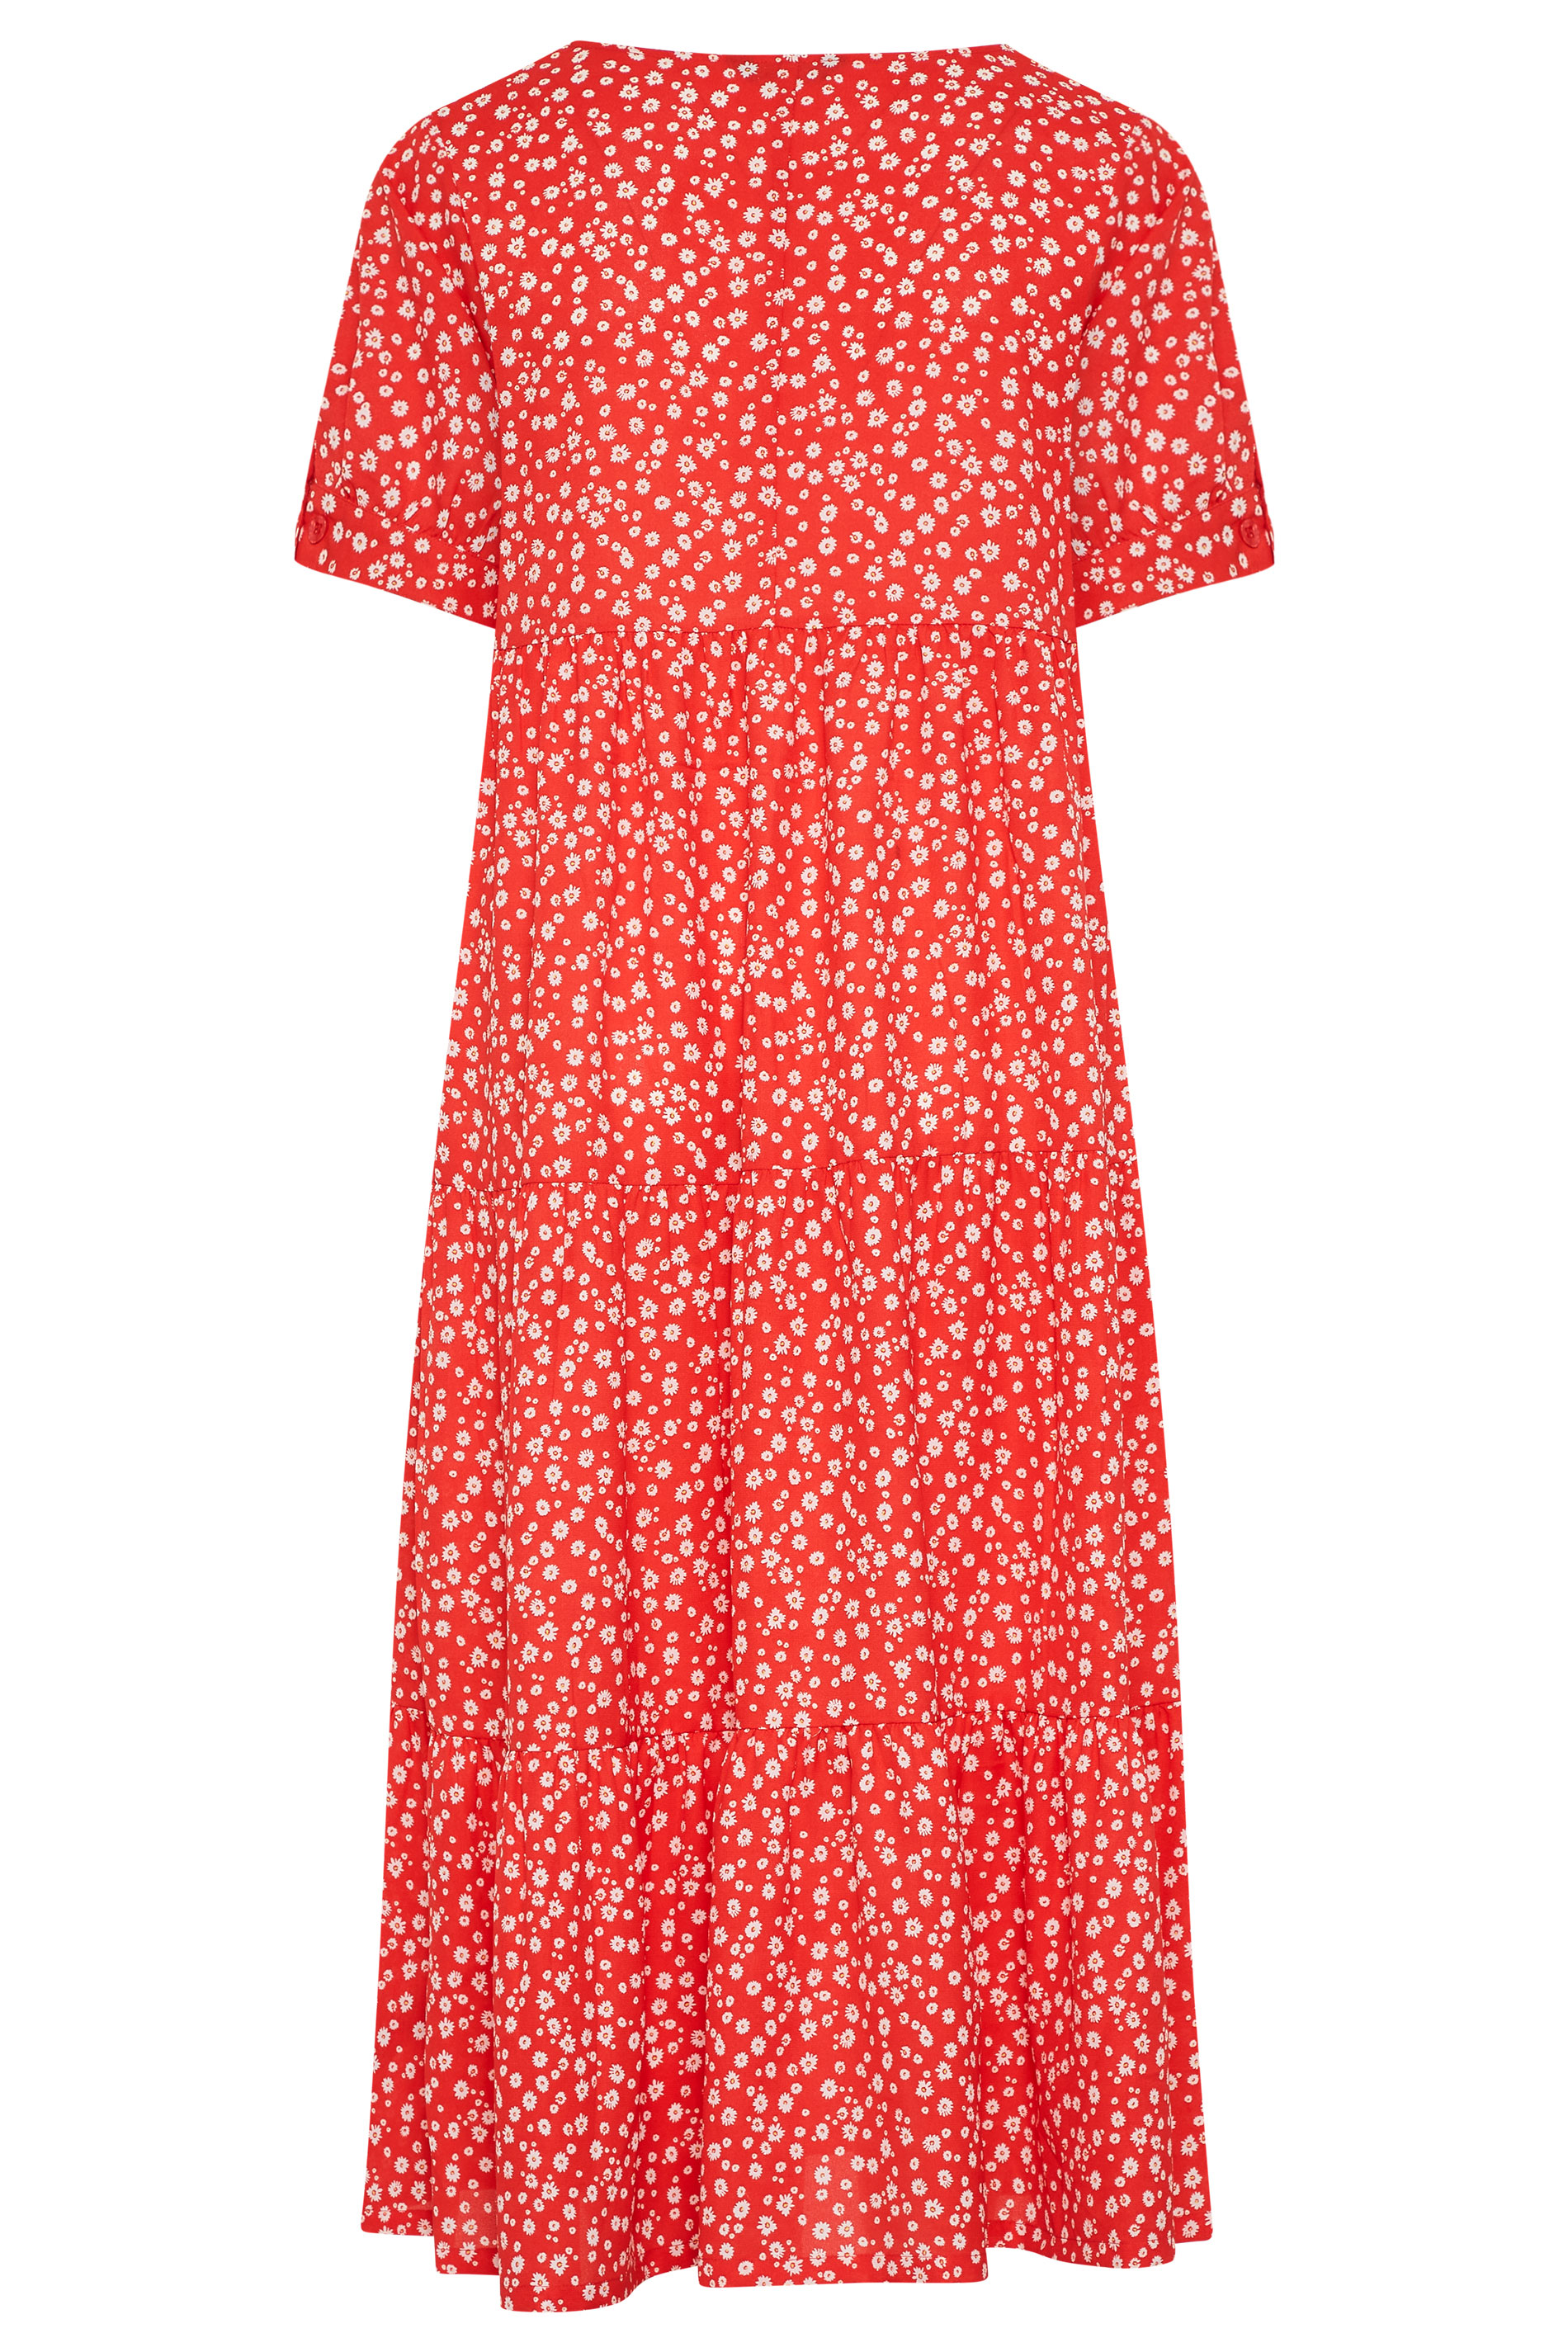 LIMITED COLLECTION Red Daisy Print Tiered Maxi Dress | Yours Clothing